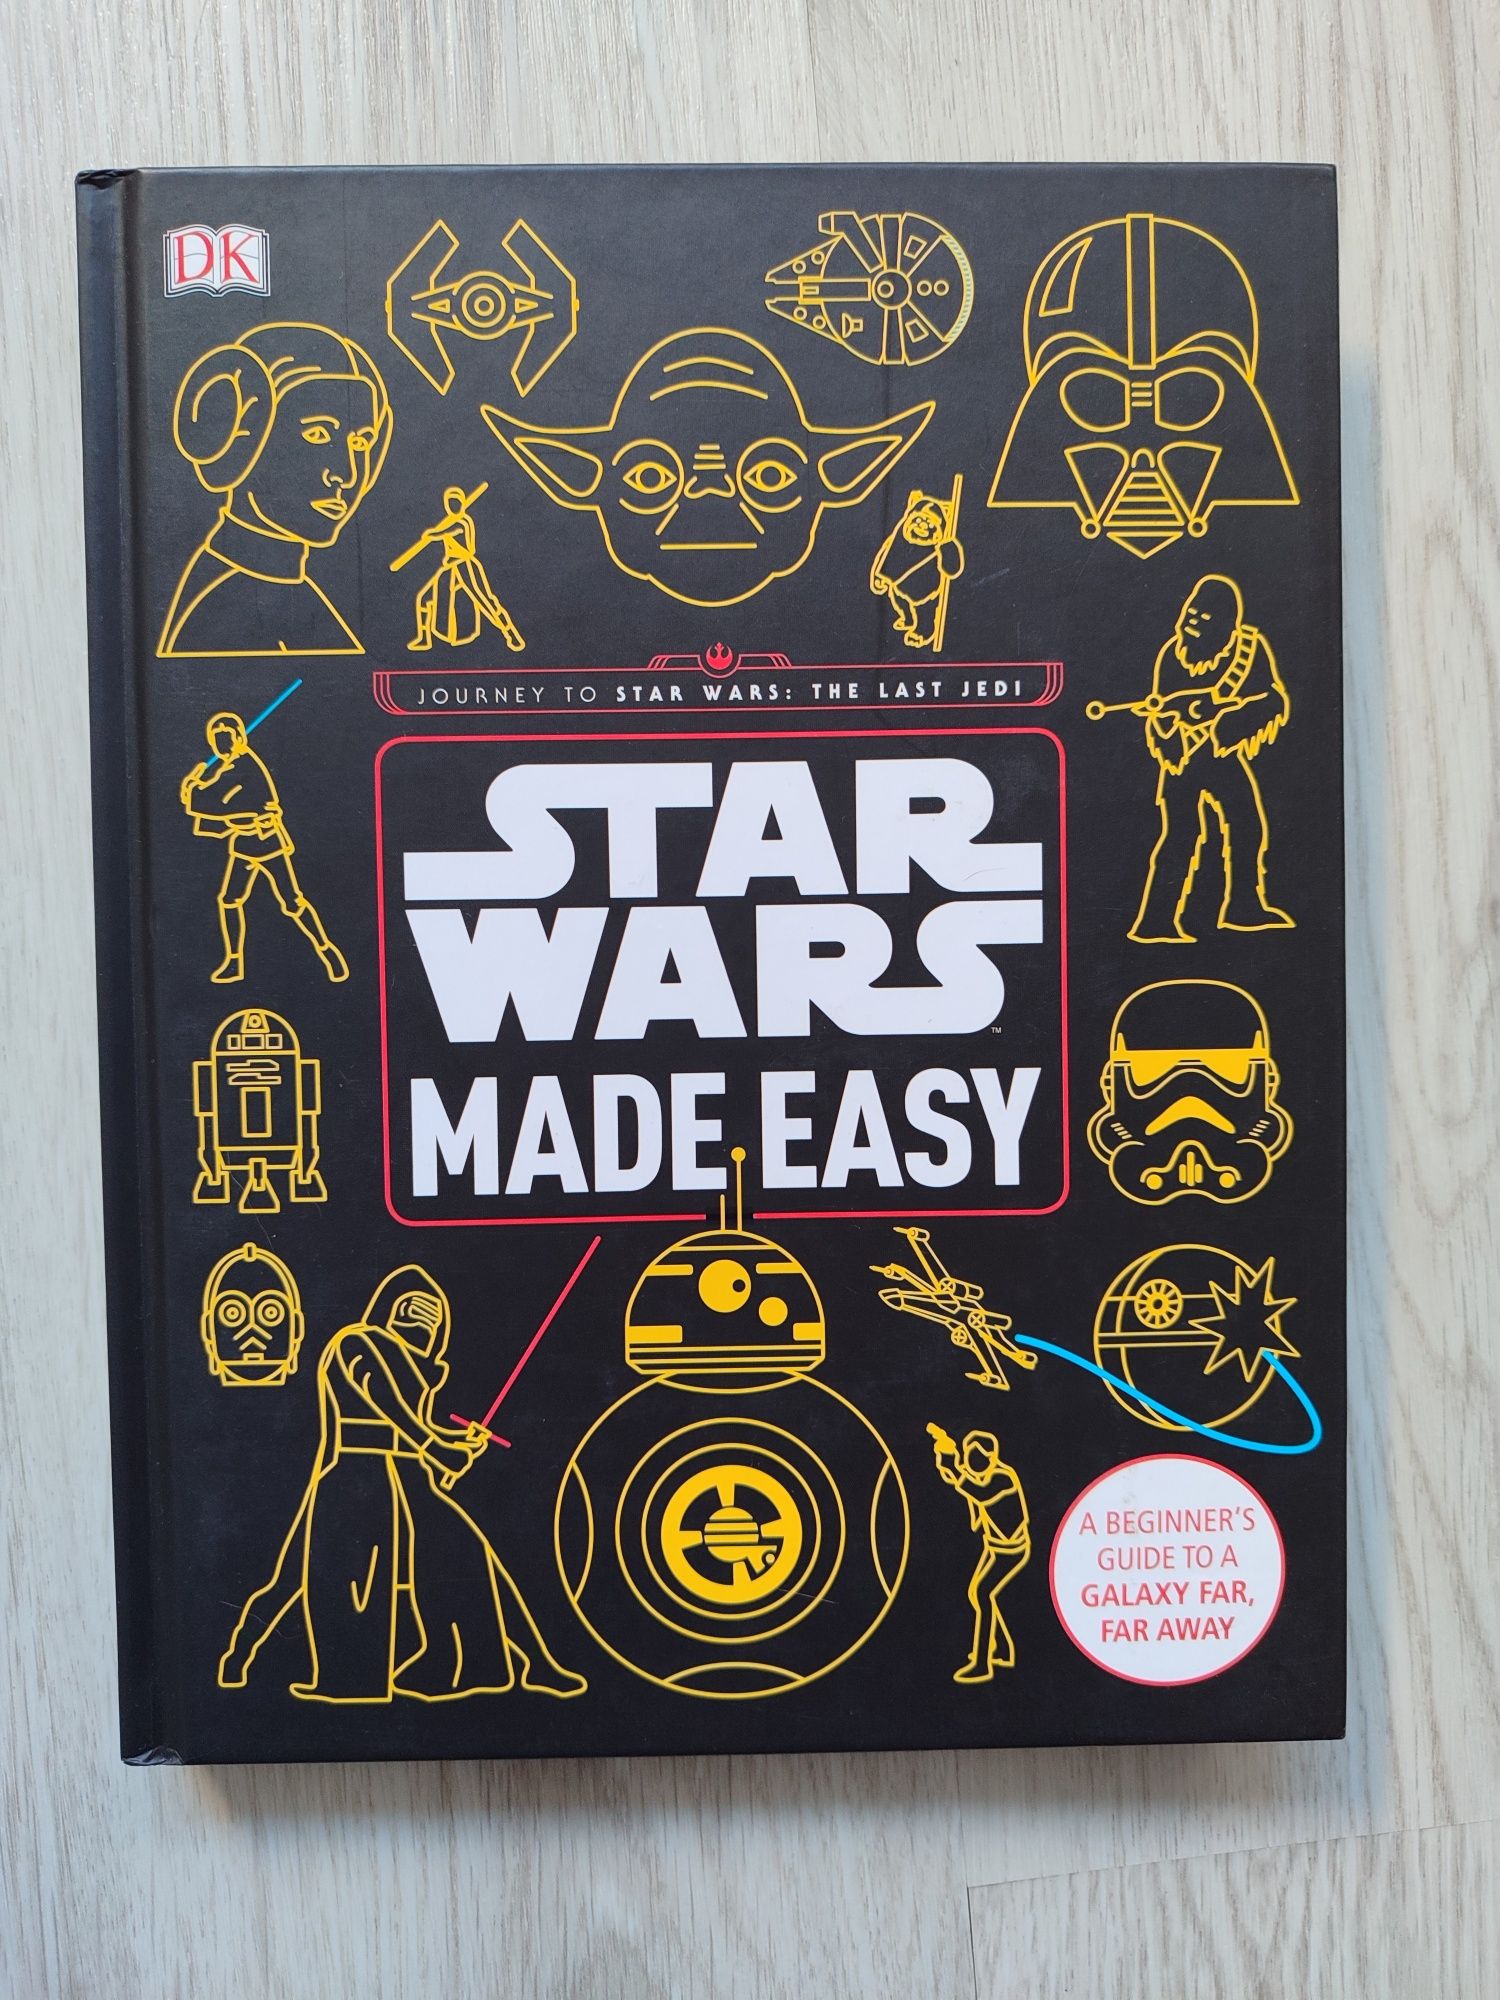 Star Wars made easy